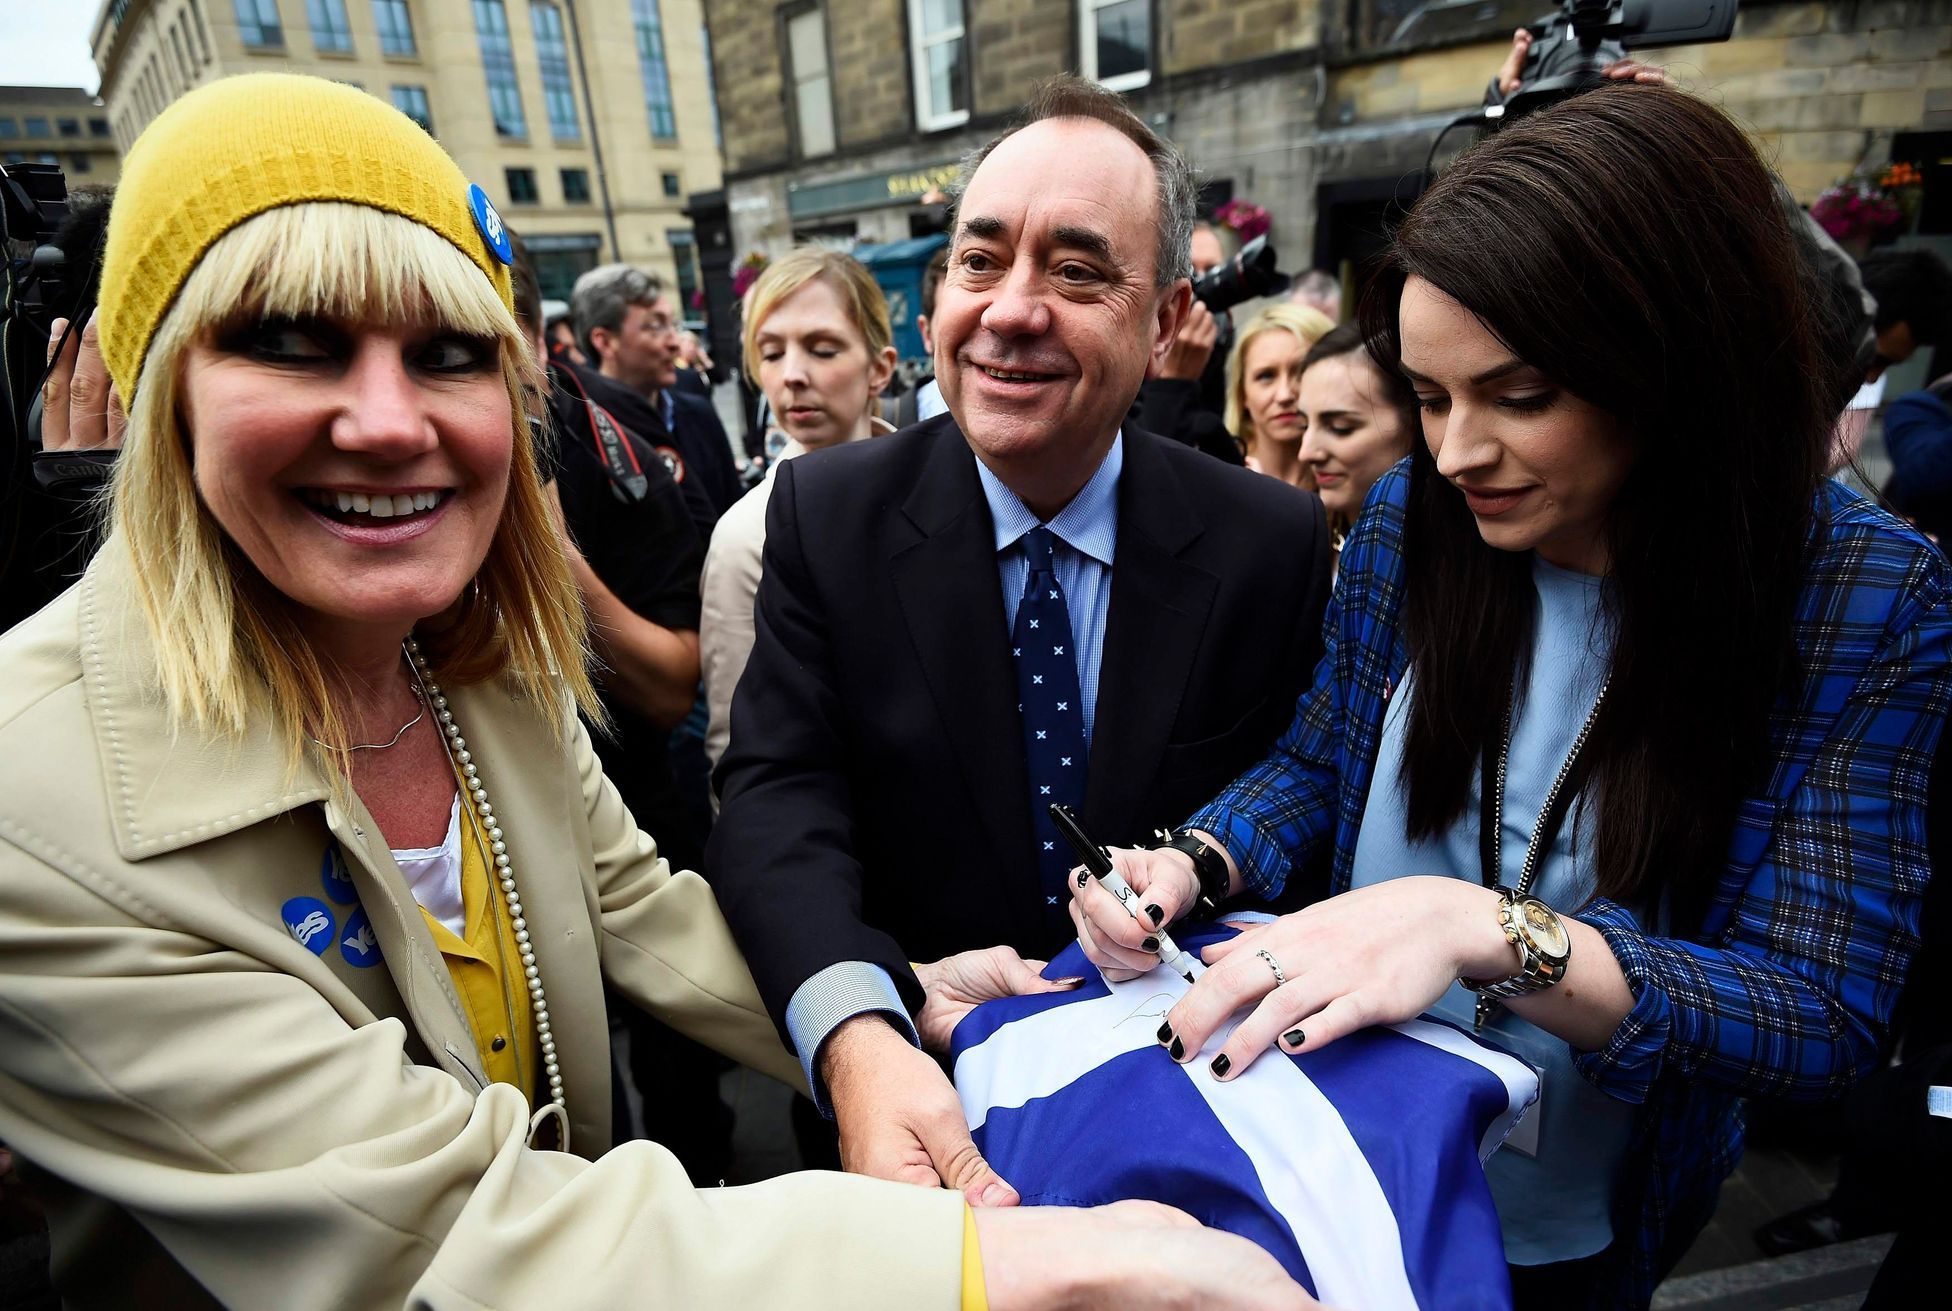 Scotland's First Minister Alex Salmond and local singer-songwriter Amy Macdonald  sign a 'Yes' supporter's flag during an event in Edinburgh, Scotland